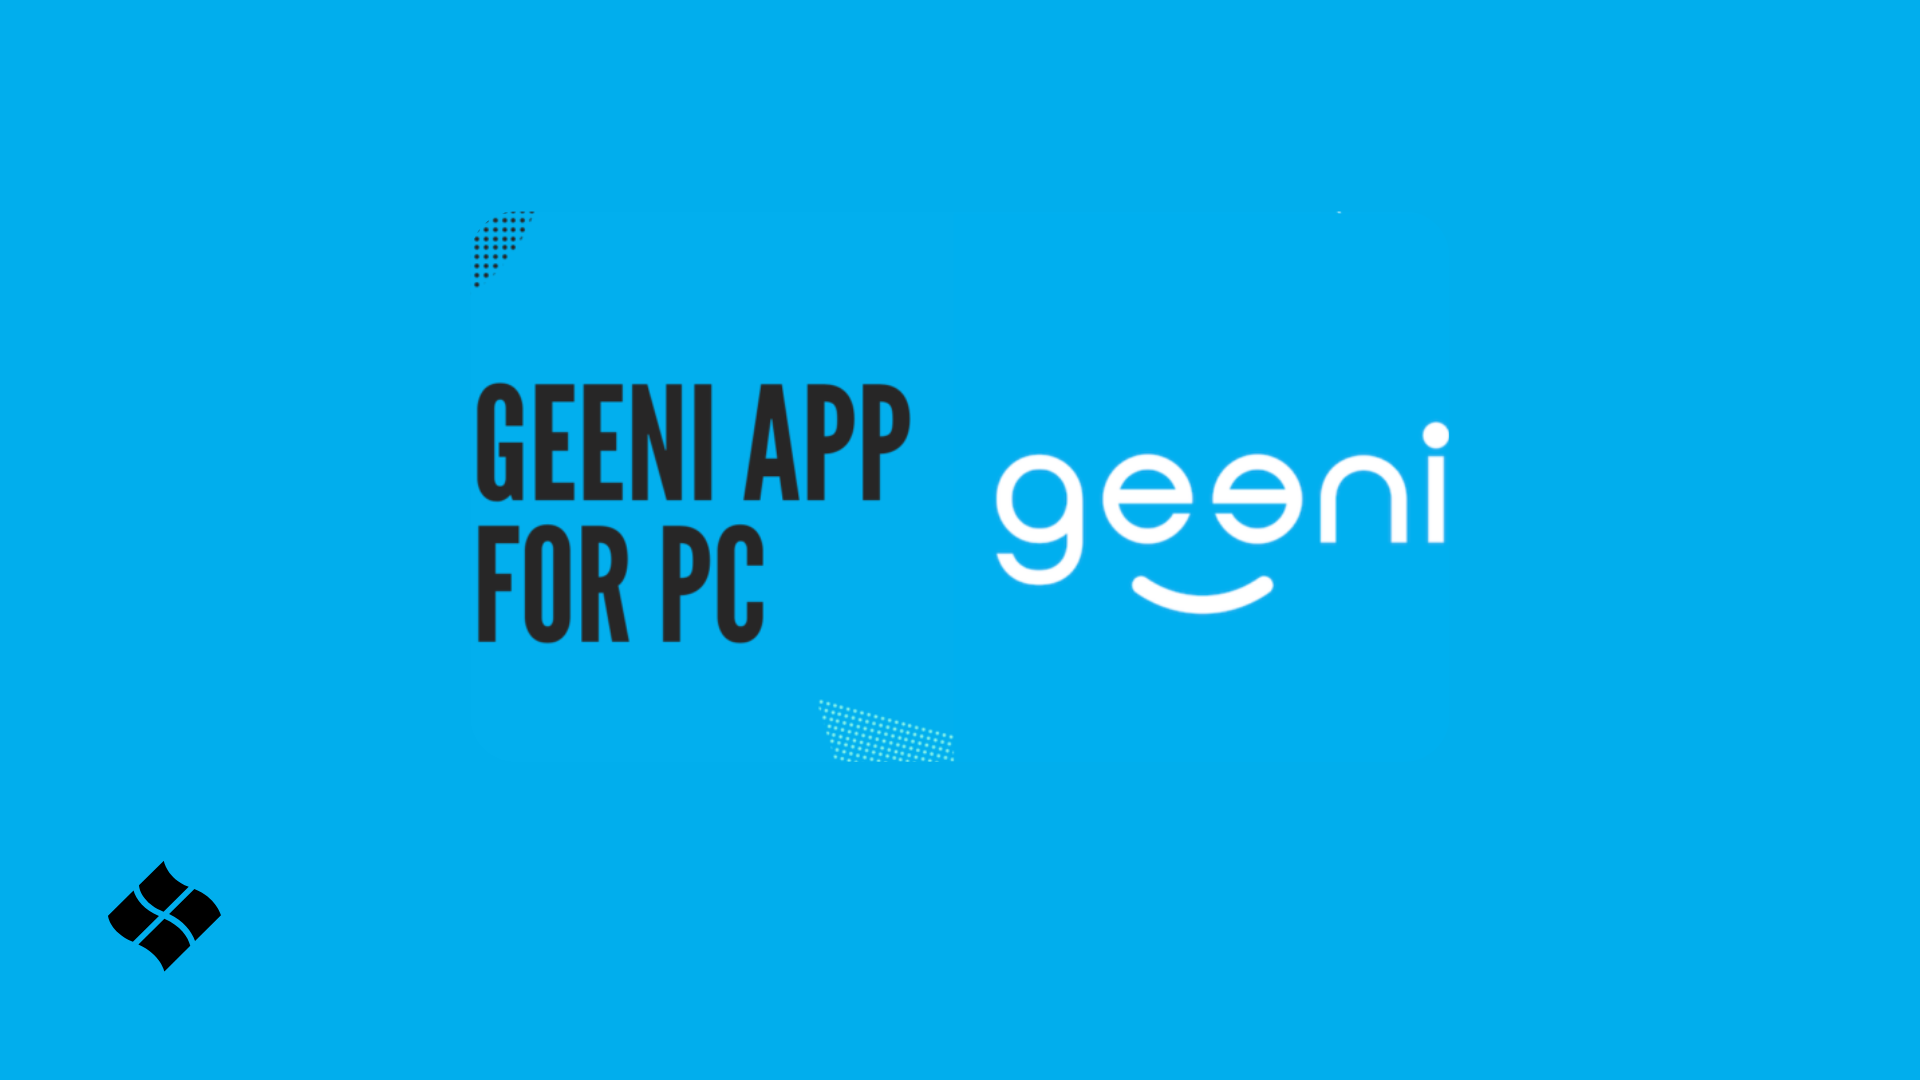 Download Geeni App For PC Free on Windows